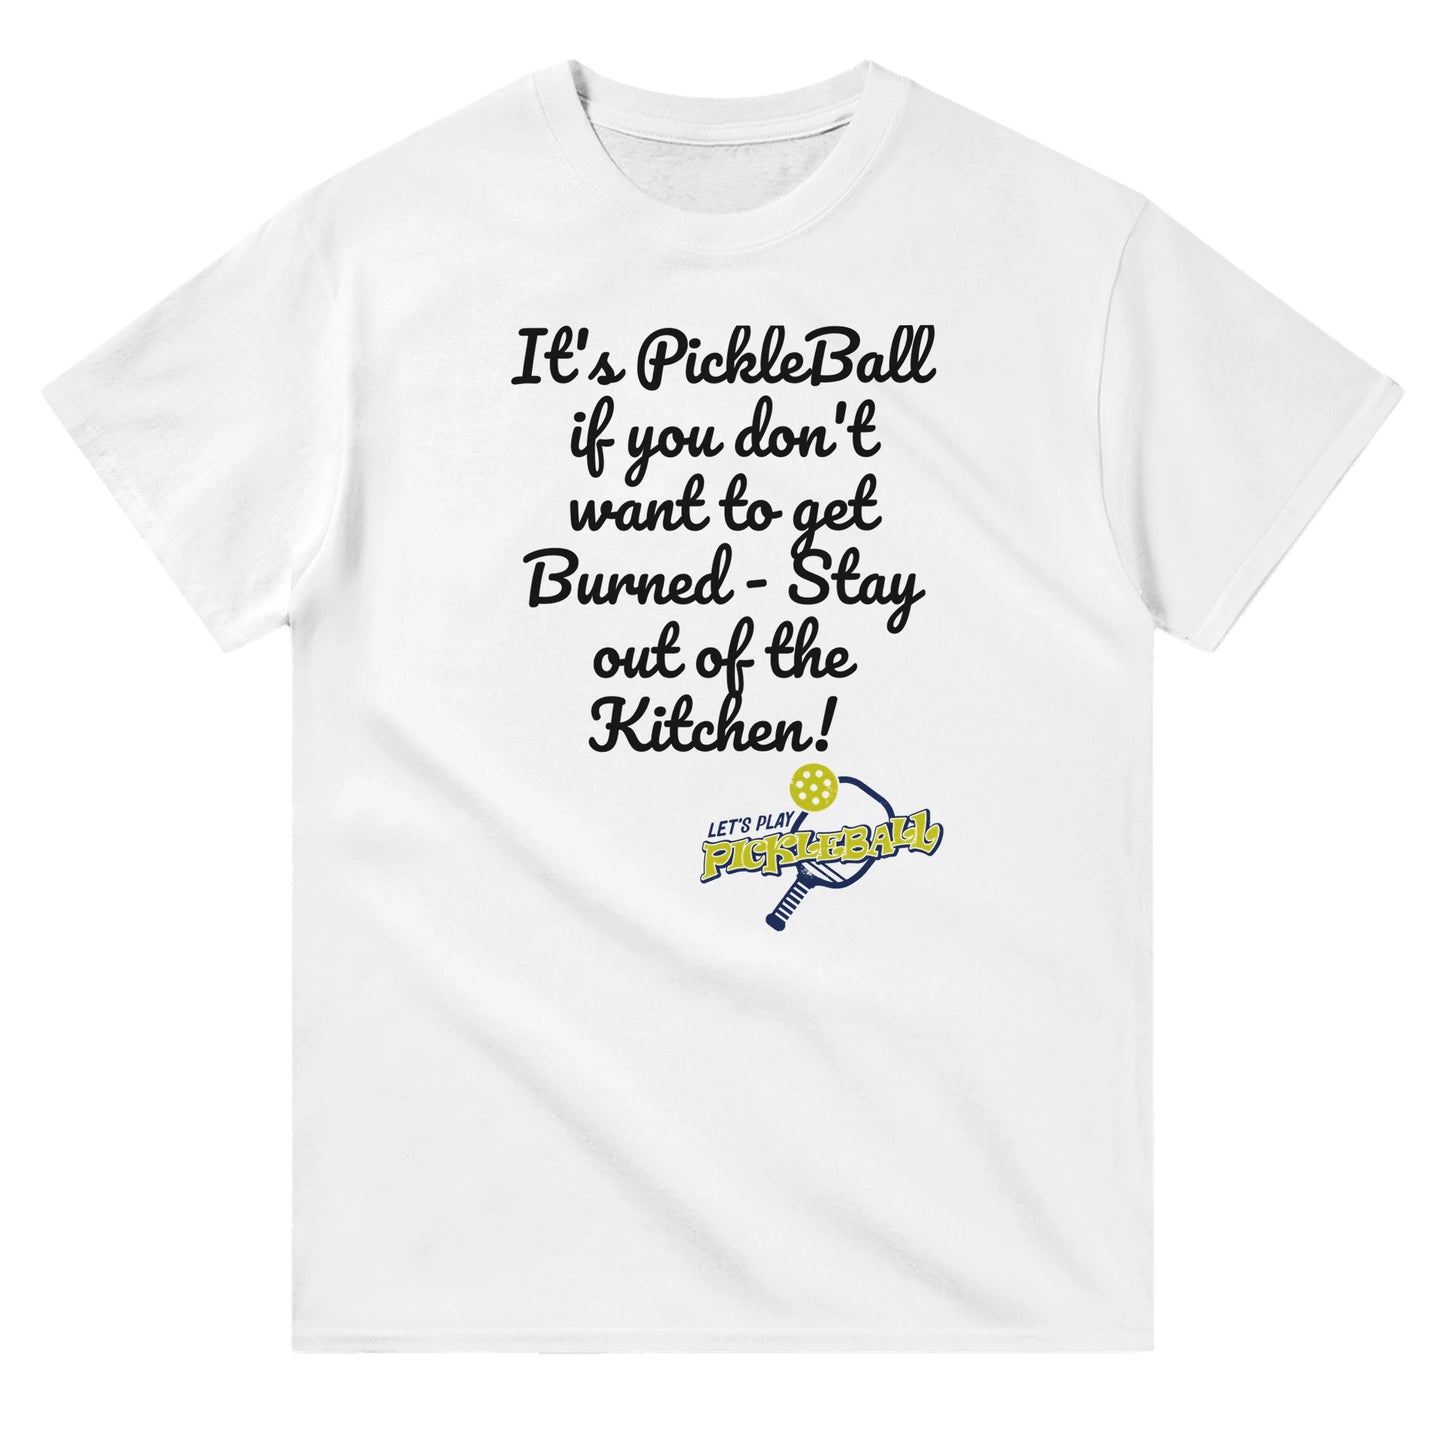 A white comfortable Unisex Crewneck heavyweight cotton t-shirt with funny saying It’s PickleBall if you don’t want to get Burned – Stay out of the Kitchen! and Let’s Play Pickleball logo on the front from WhatYa Say Apparel lying flat.